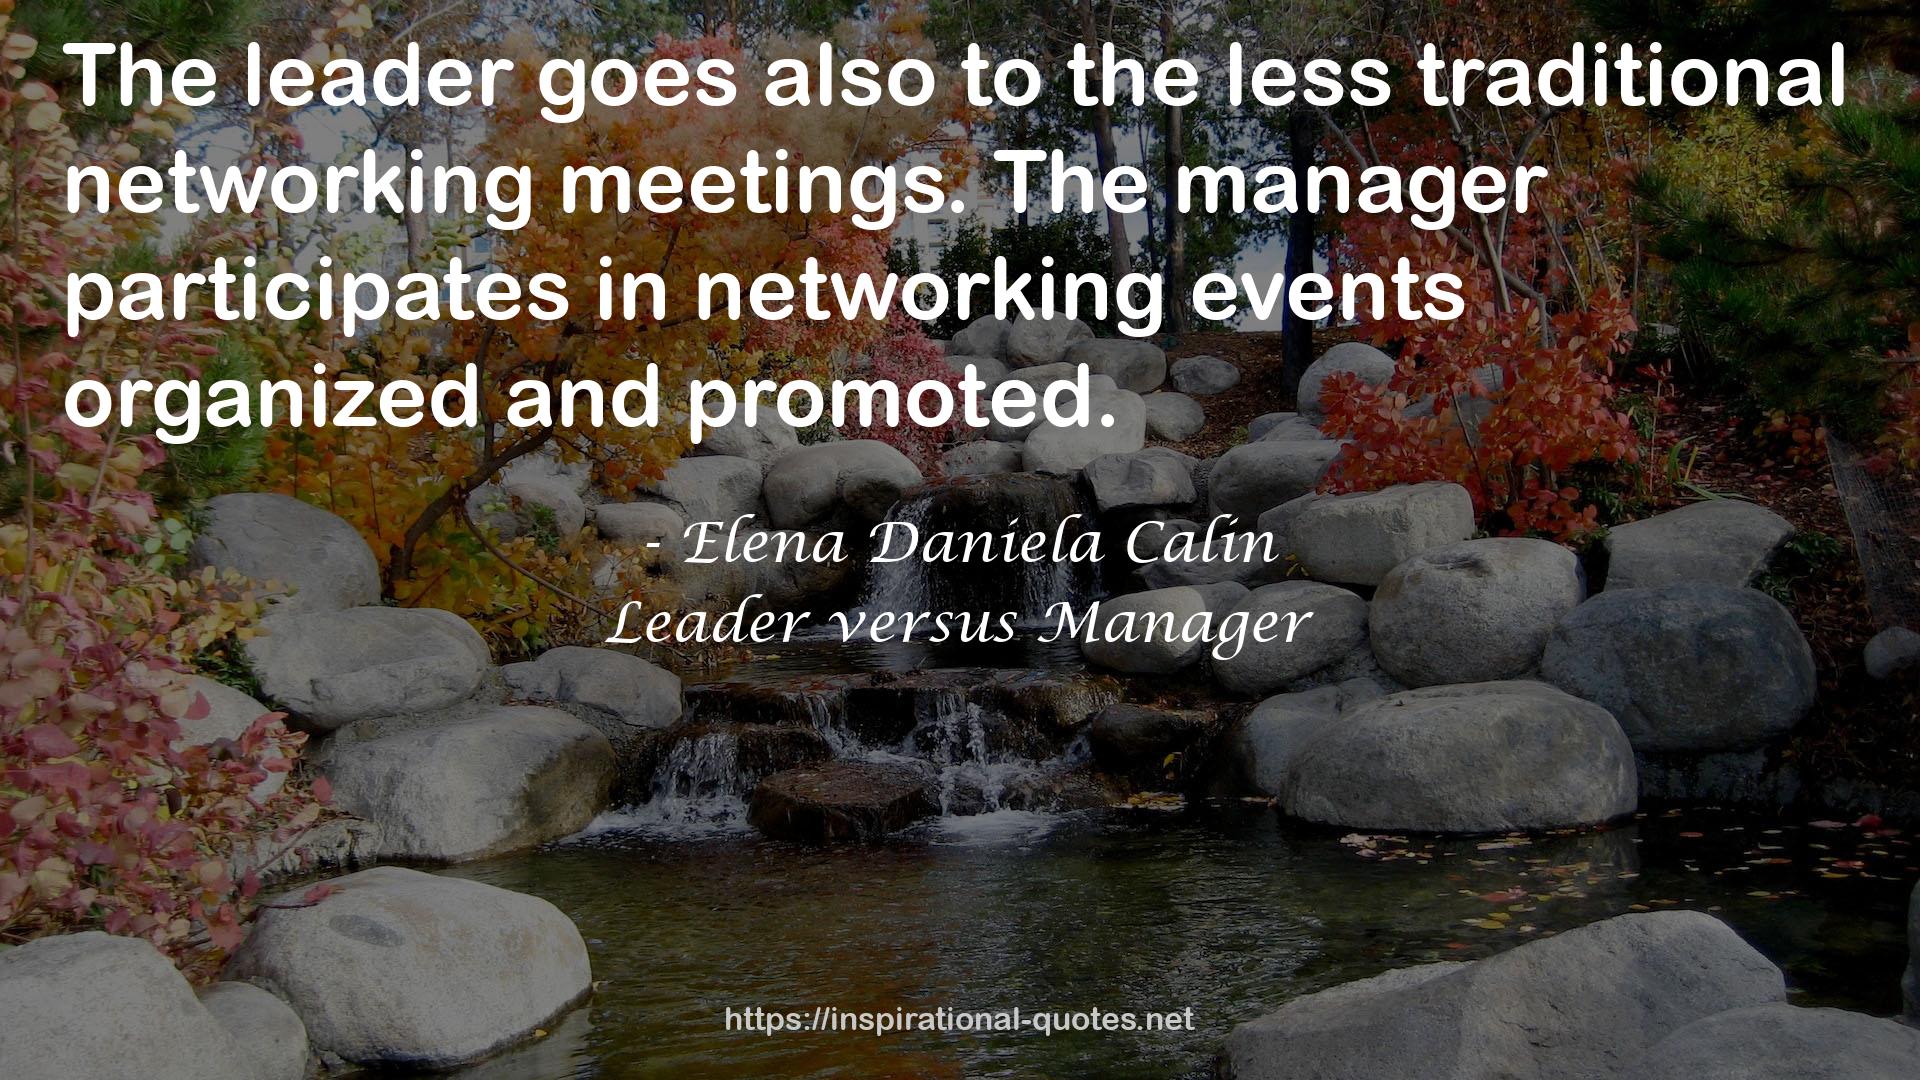 Leader versus Manager QUOTES